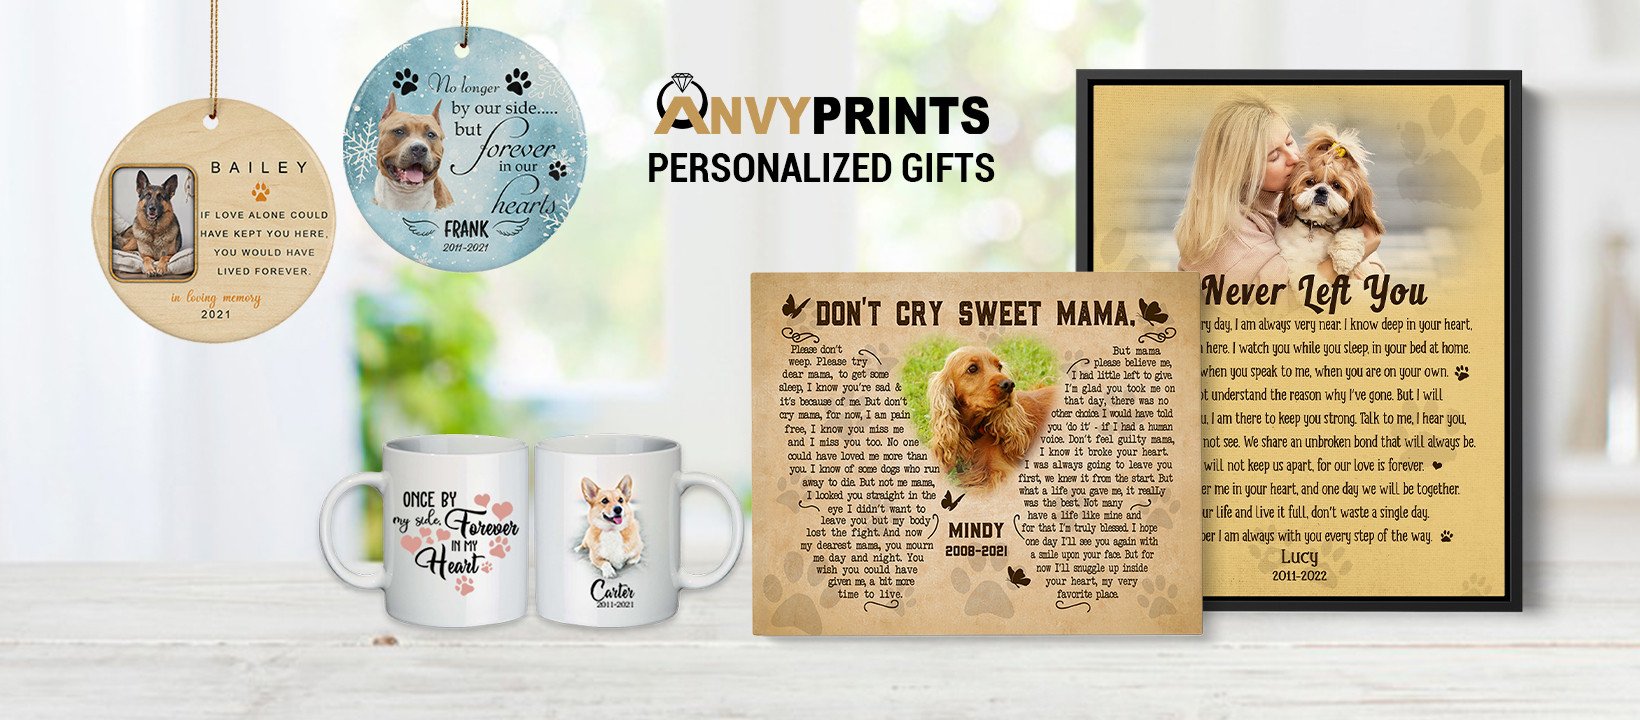 Anvyprints - Personalized Gifts